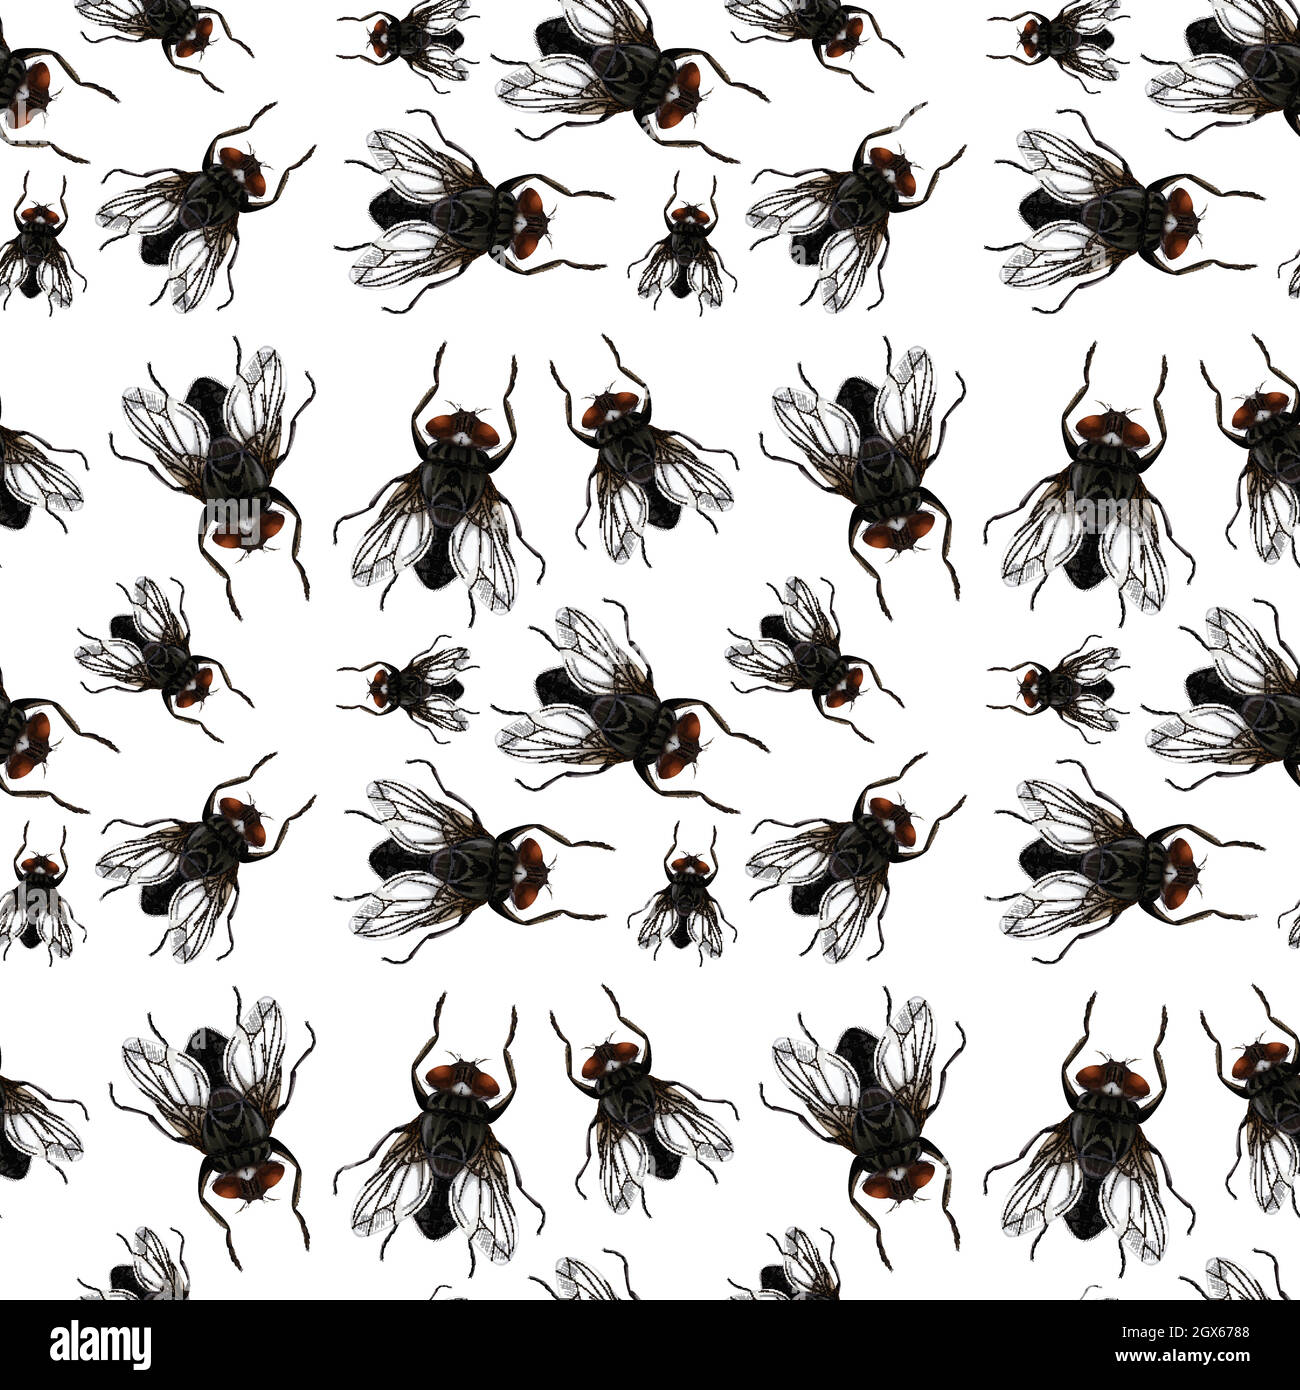 Seamless pattern of flys Stock Vector